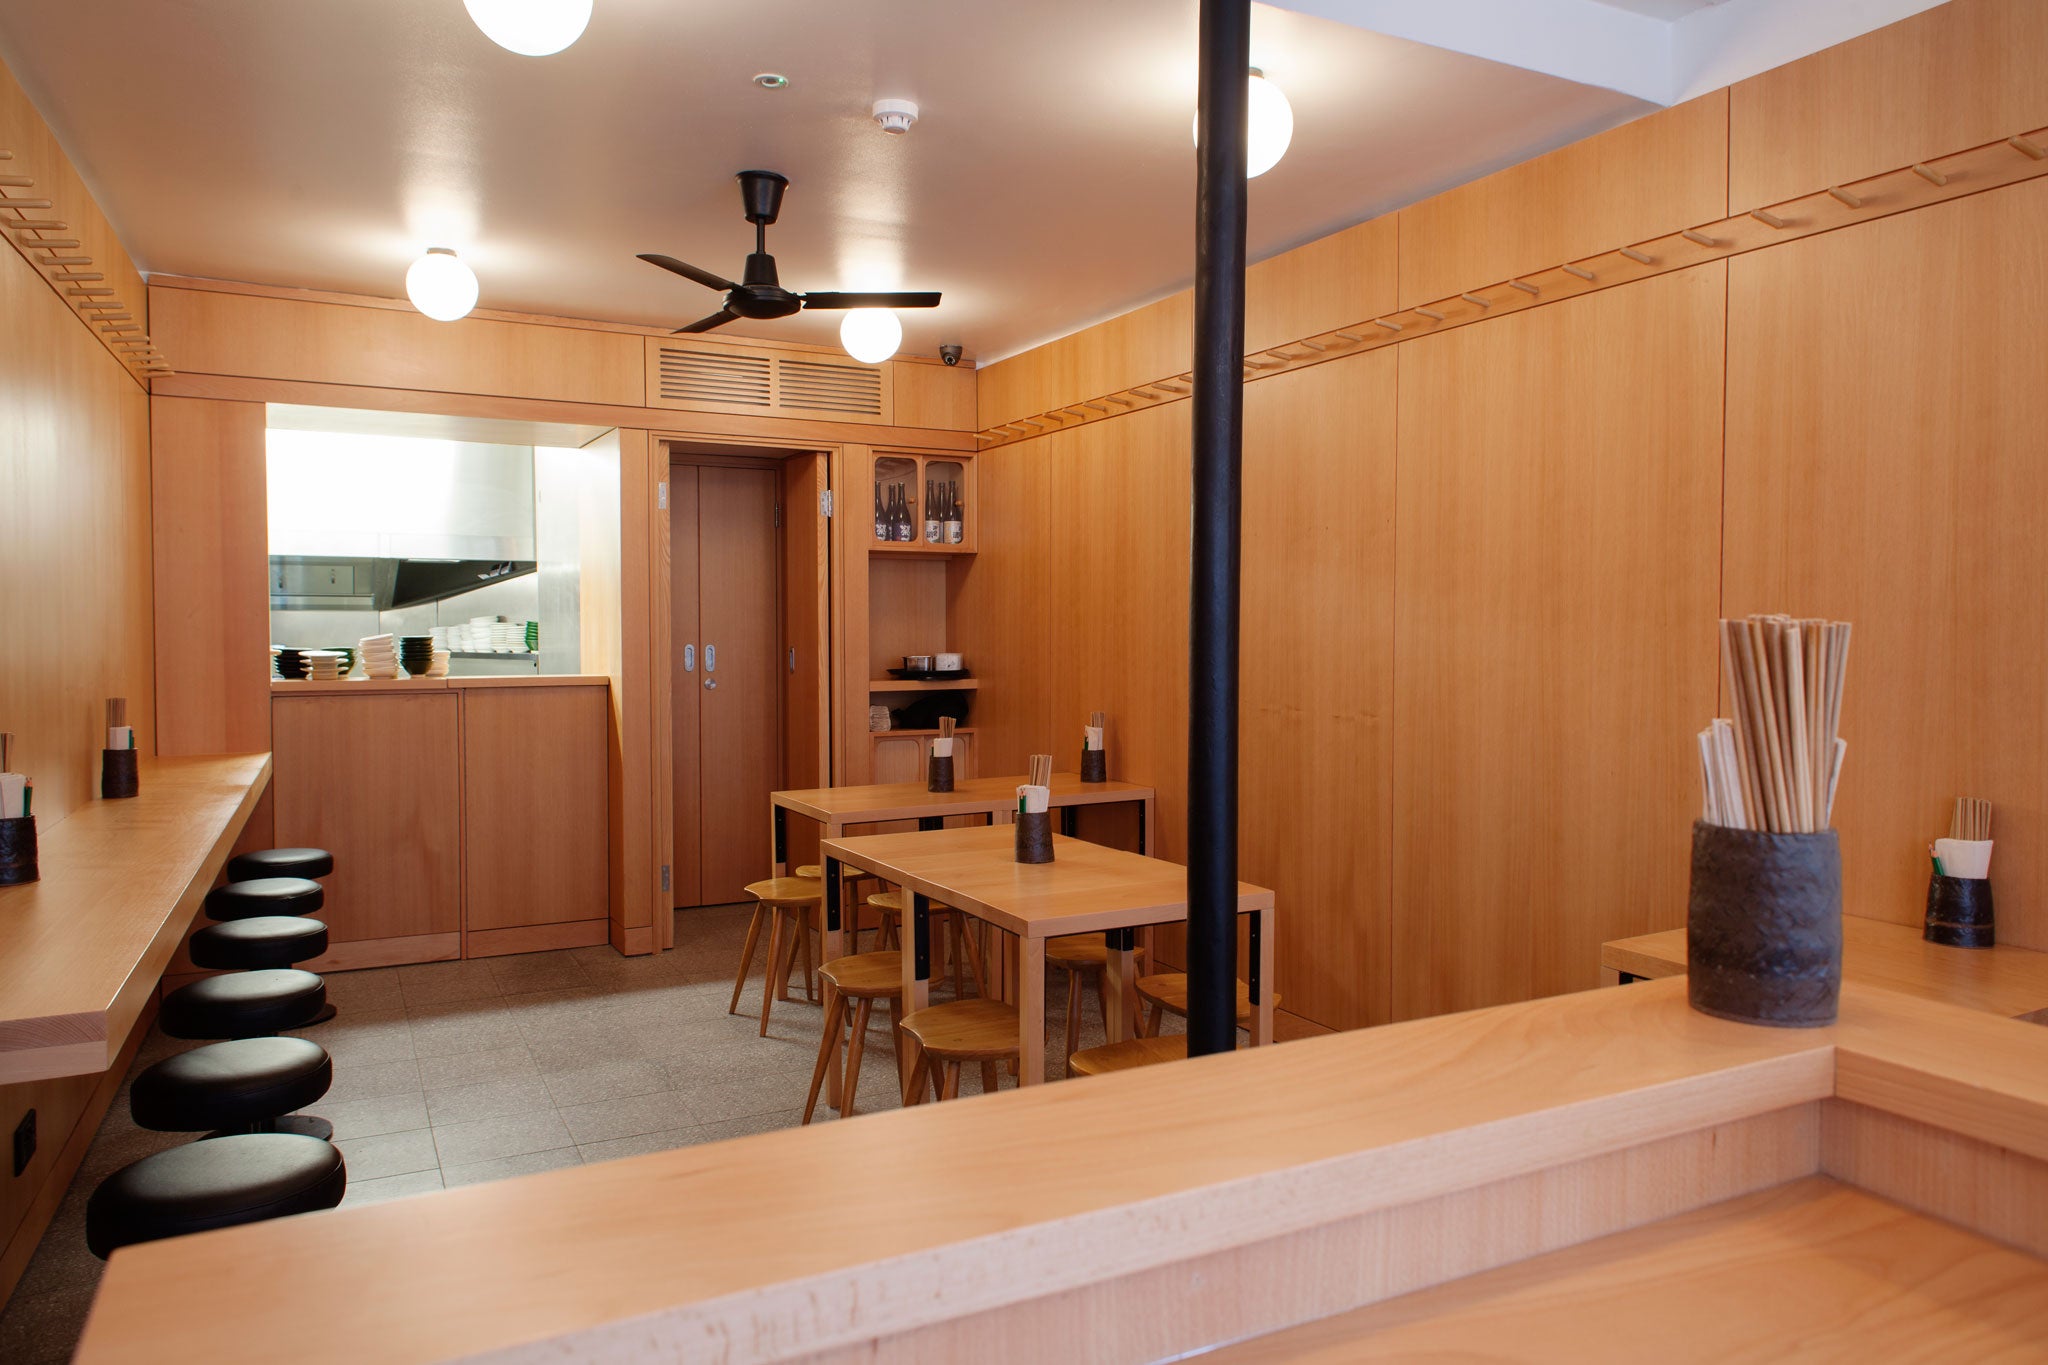 Branching out: Bao is tiny and features no-frills decor